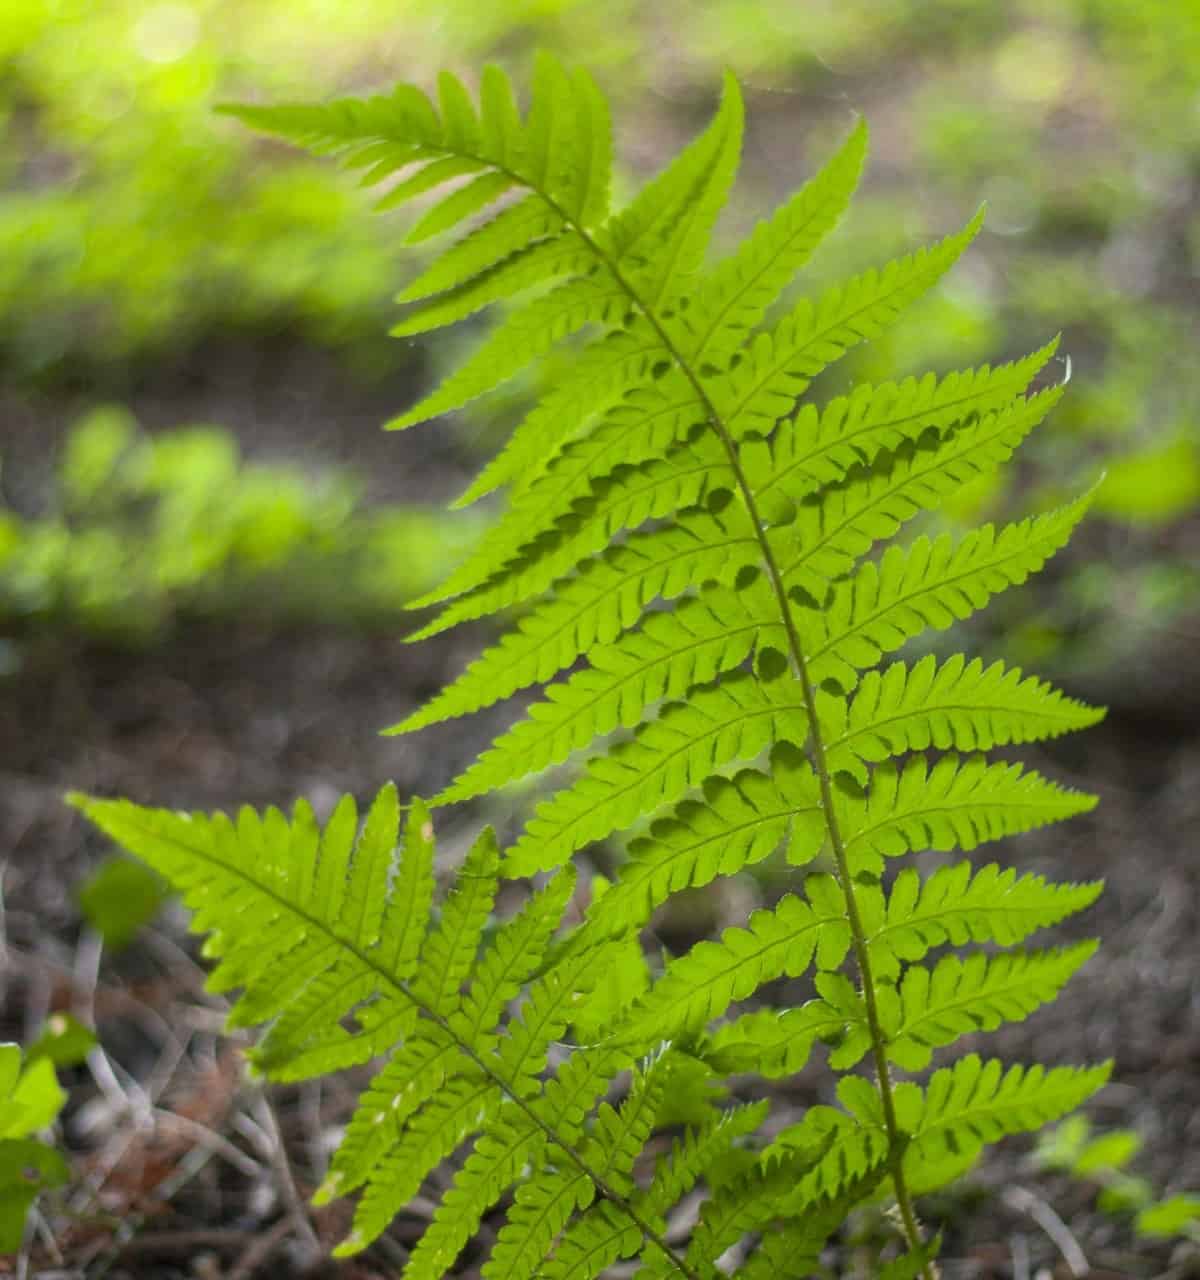 Lady fern has colorful bright-green fronds.